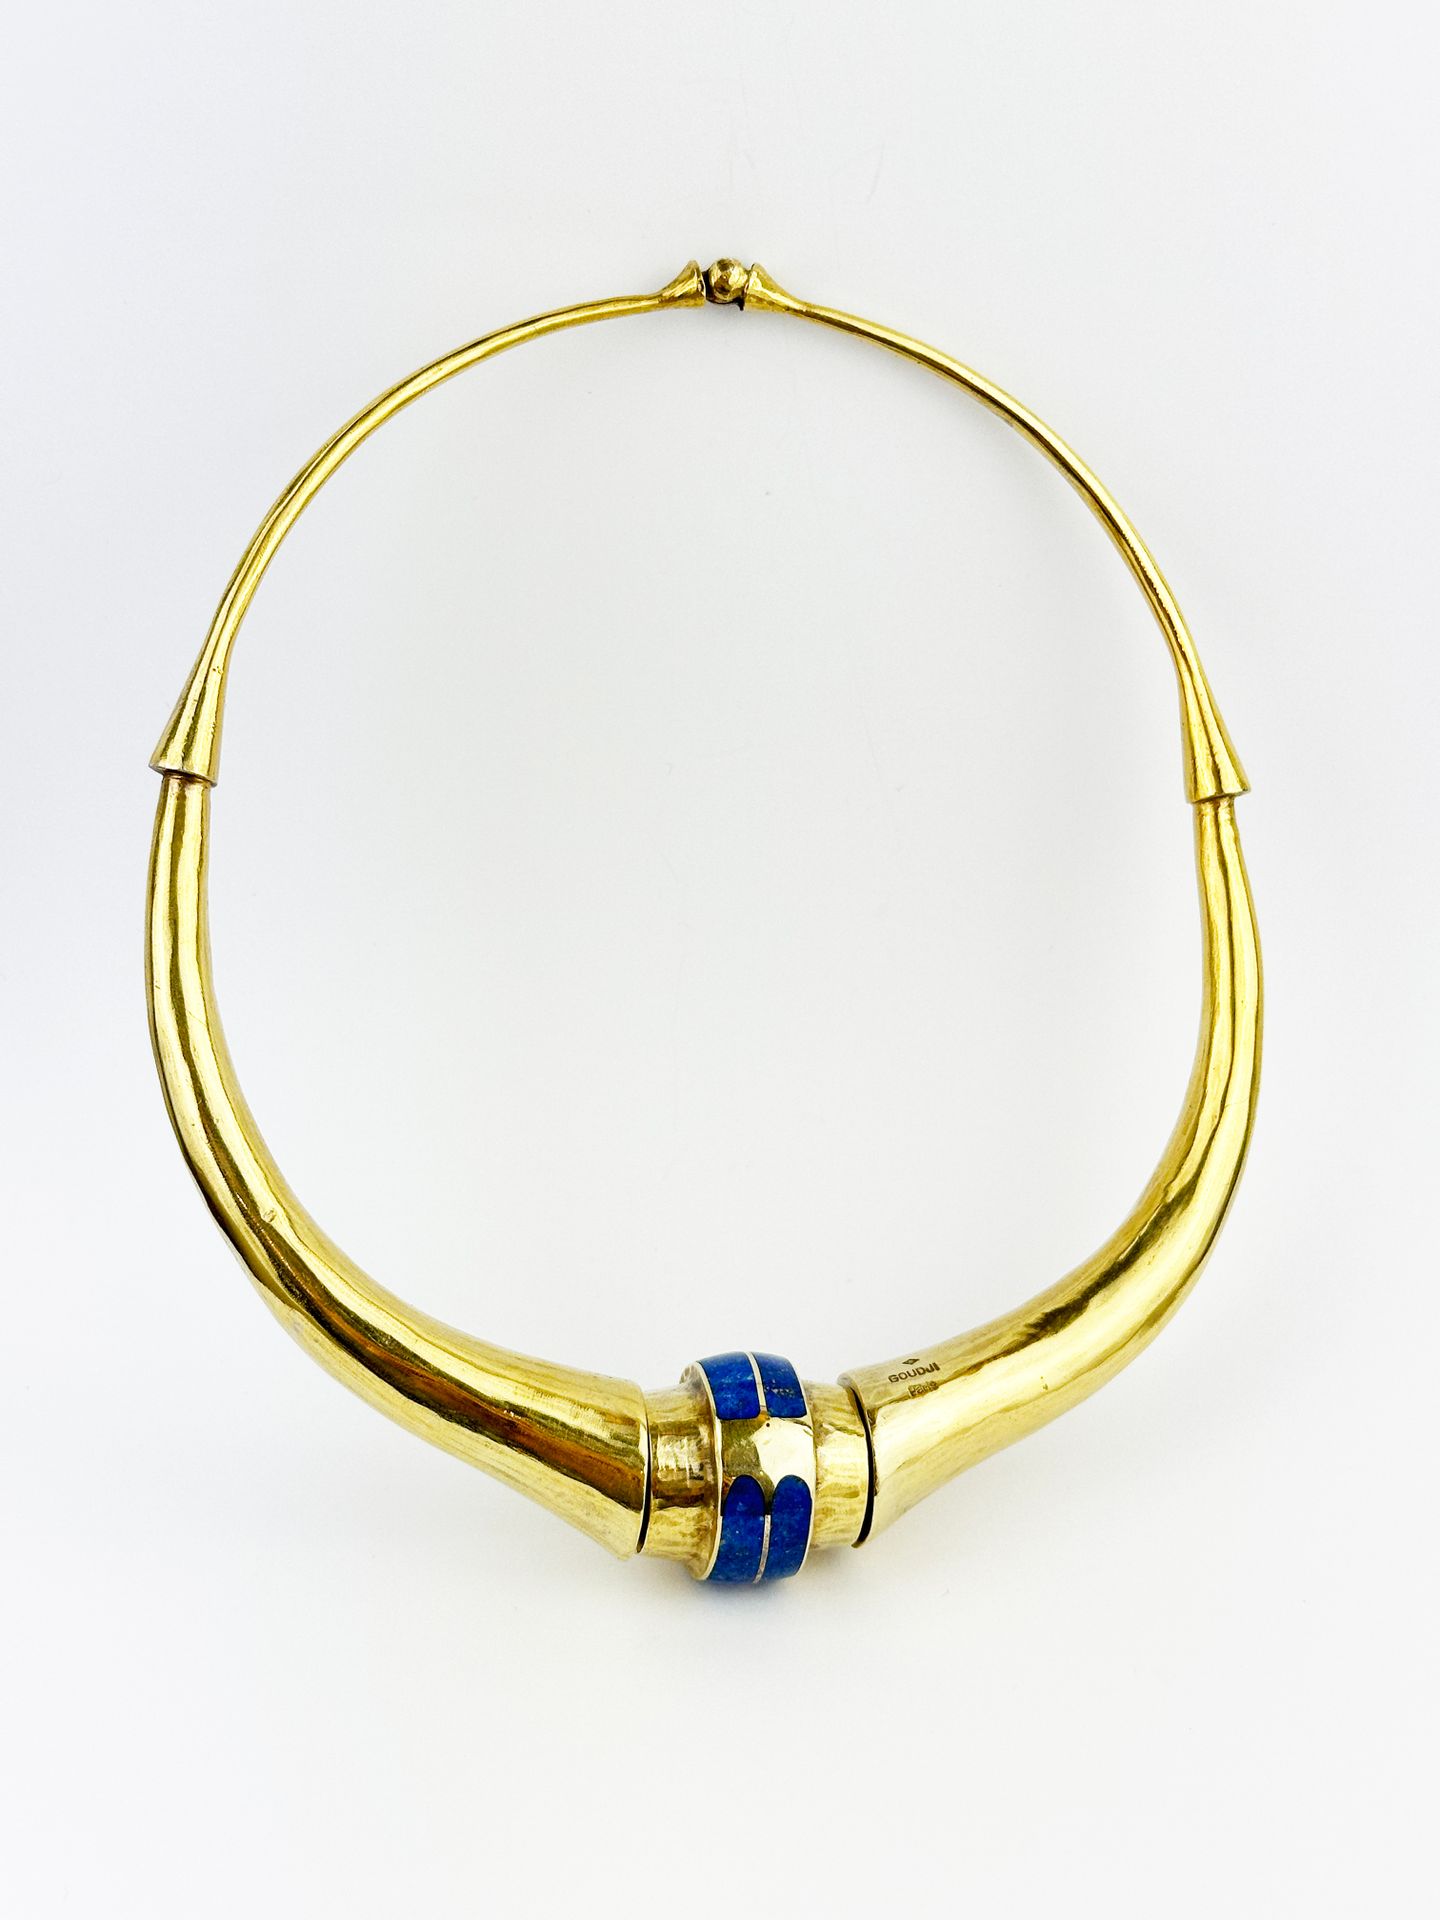 Null GOUDJI Paris
Torque necklace in vermeil (800th), centered with a barrel-sha&hellip;